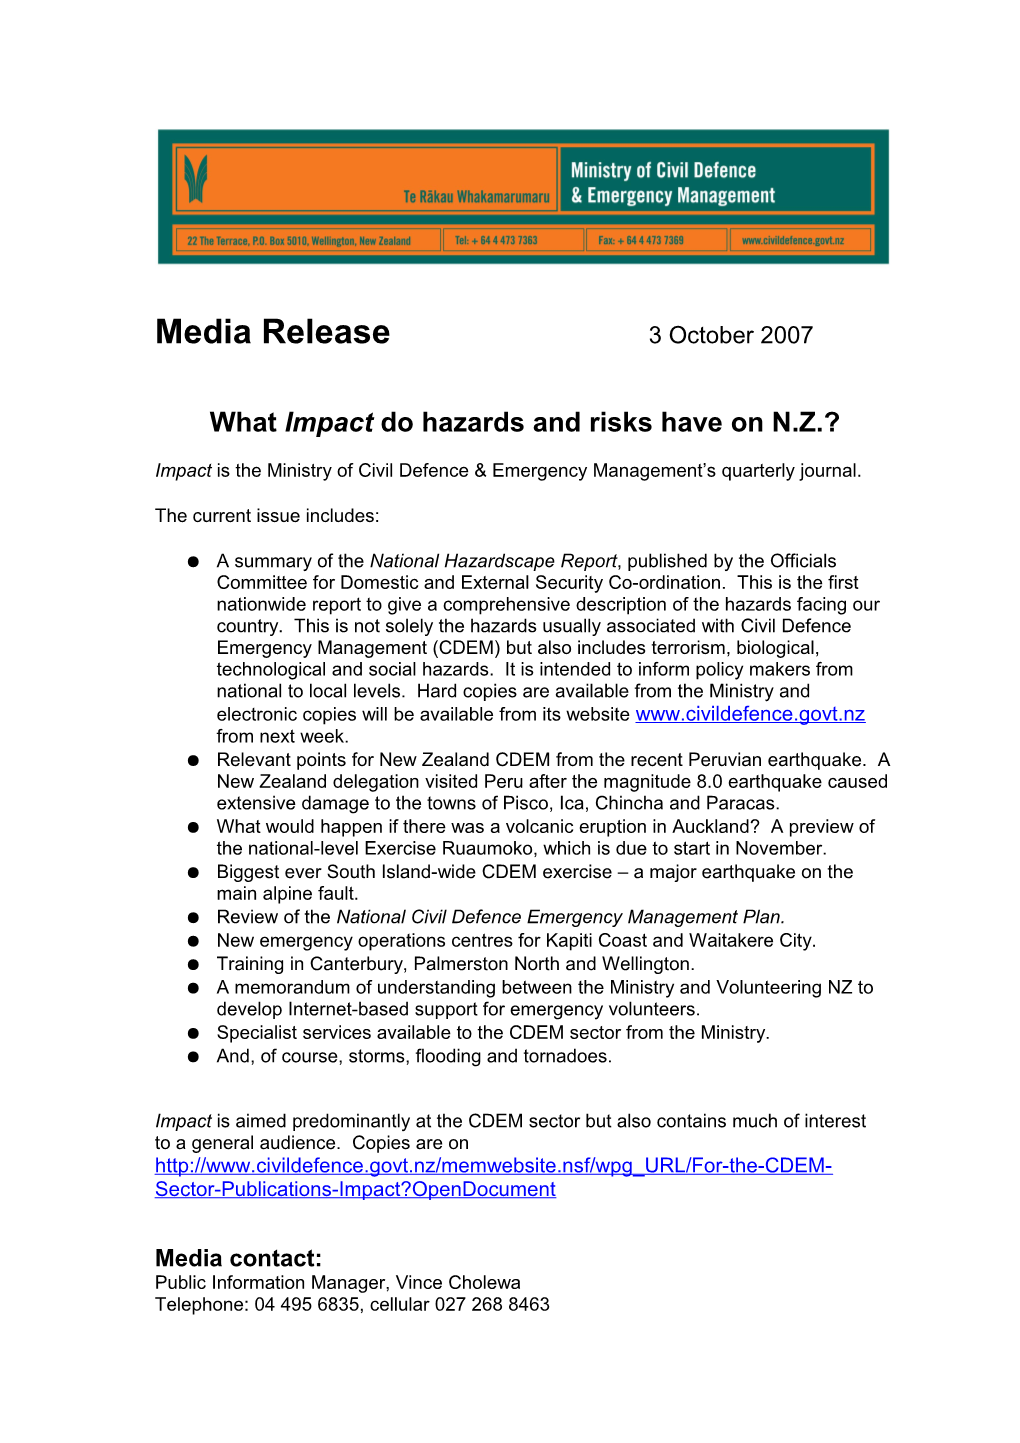 What Impact Do Hazards and Risks Have on N.Z.?